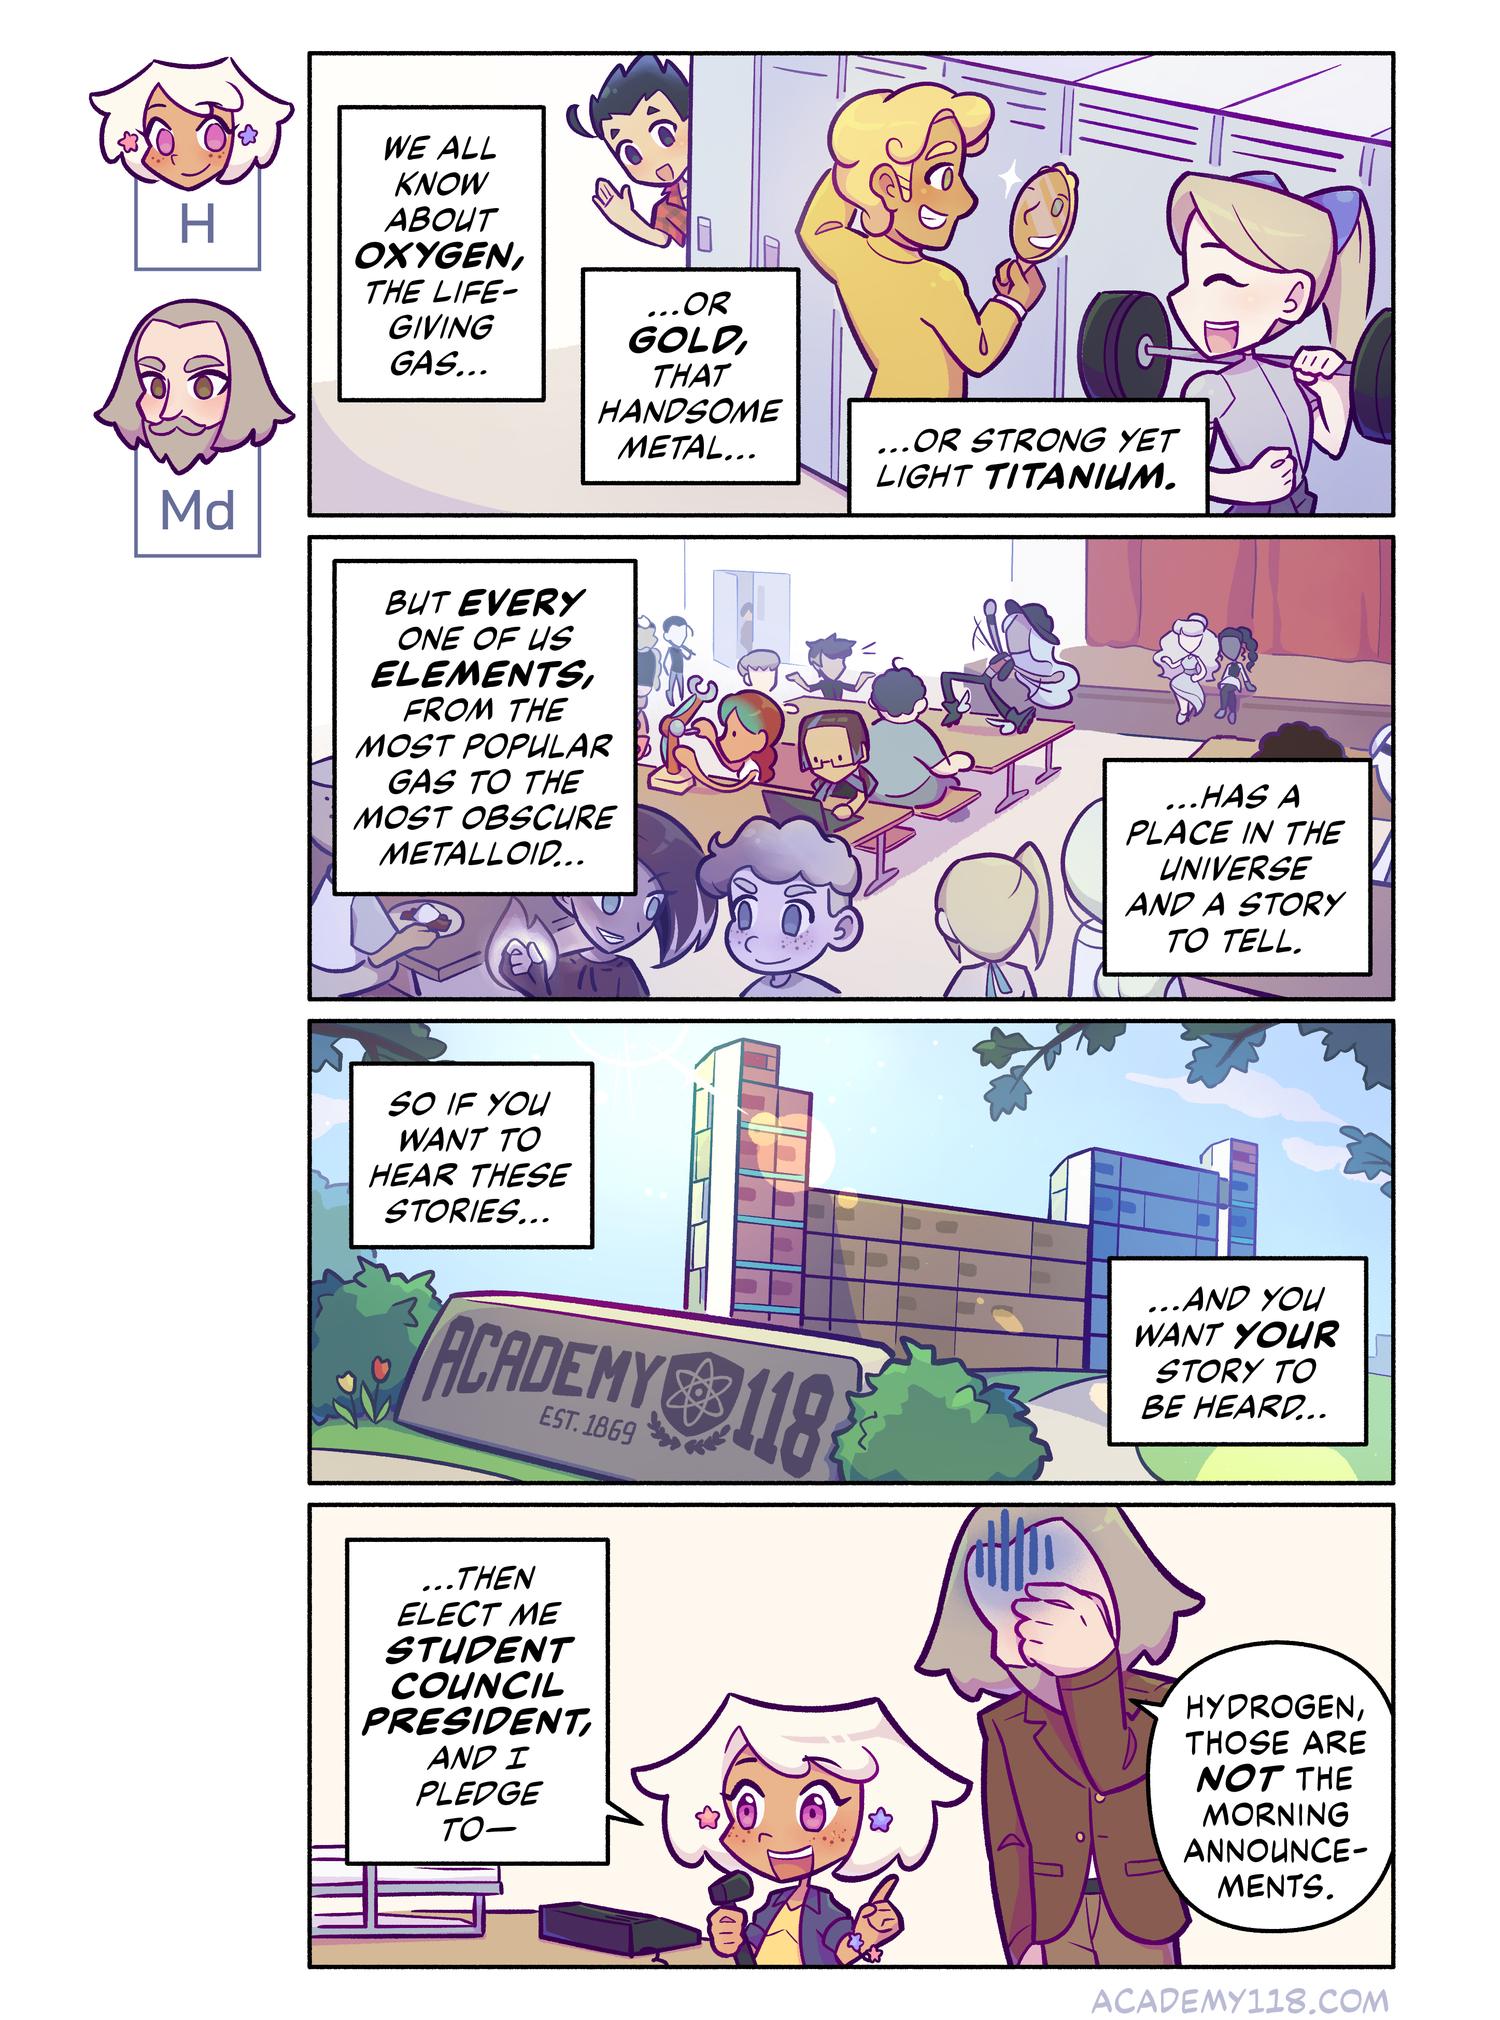 Hydrogen for President comic page 1